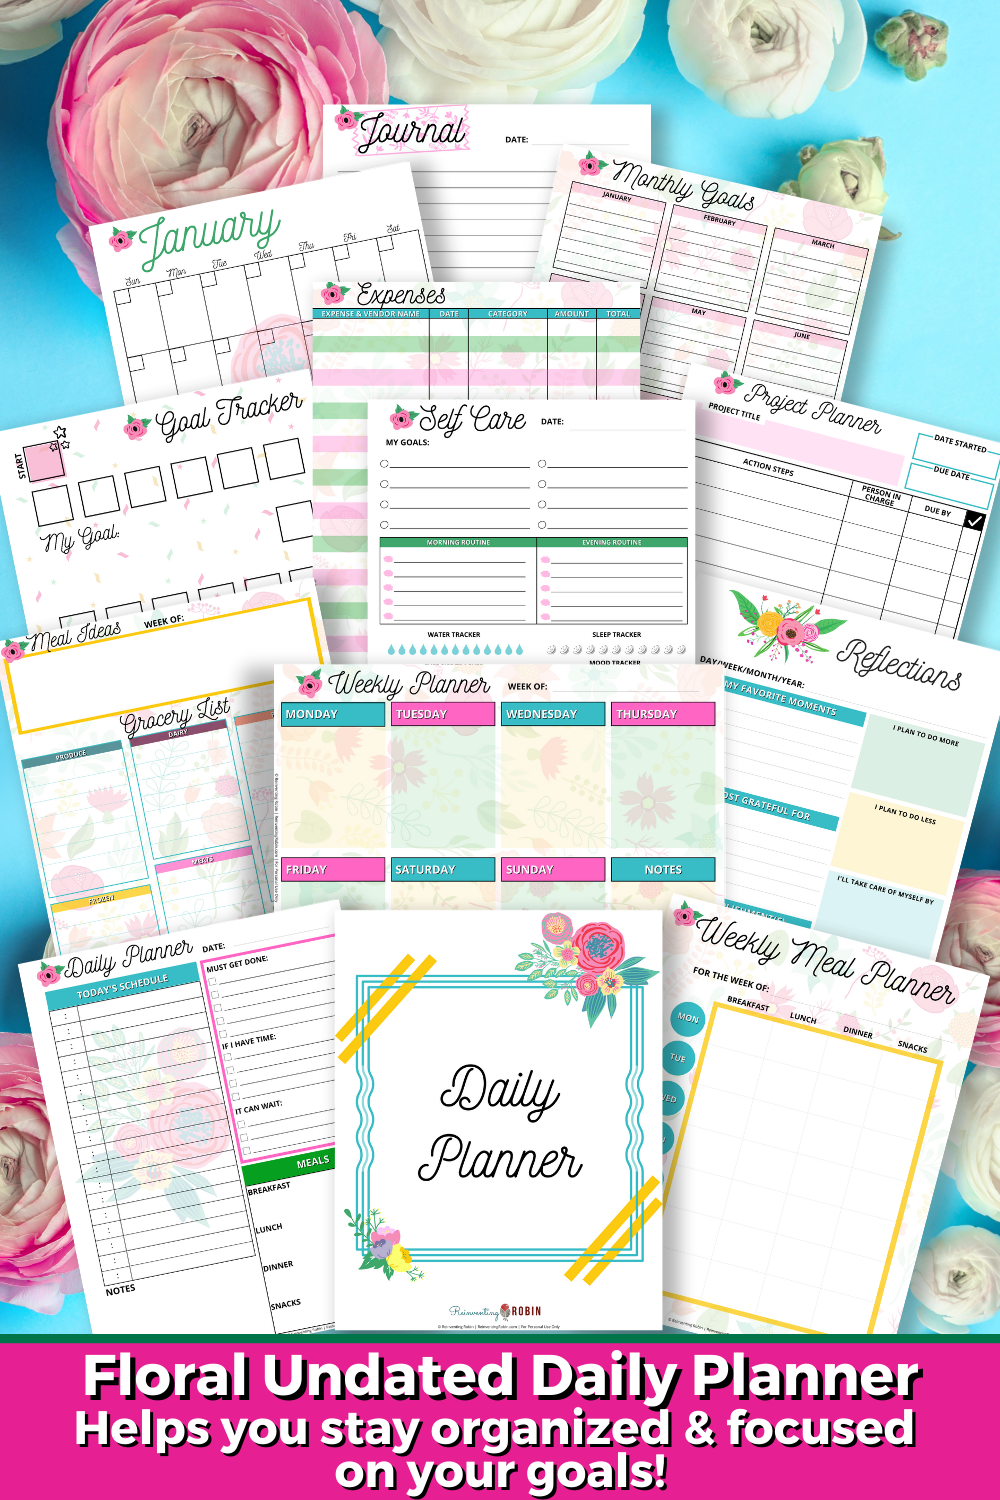 Picture of some of the pages of the Floral Undated Daily Planner. Also states Helps you stay organized & focused on your goals!